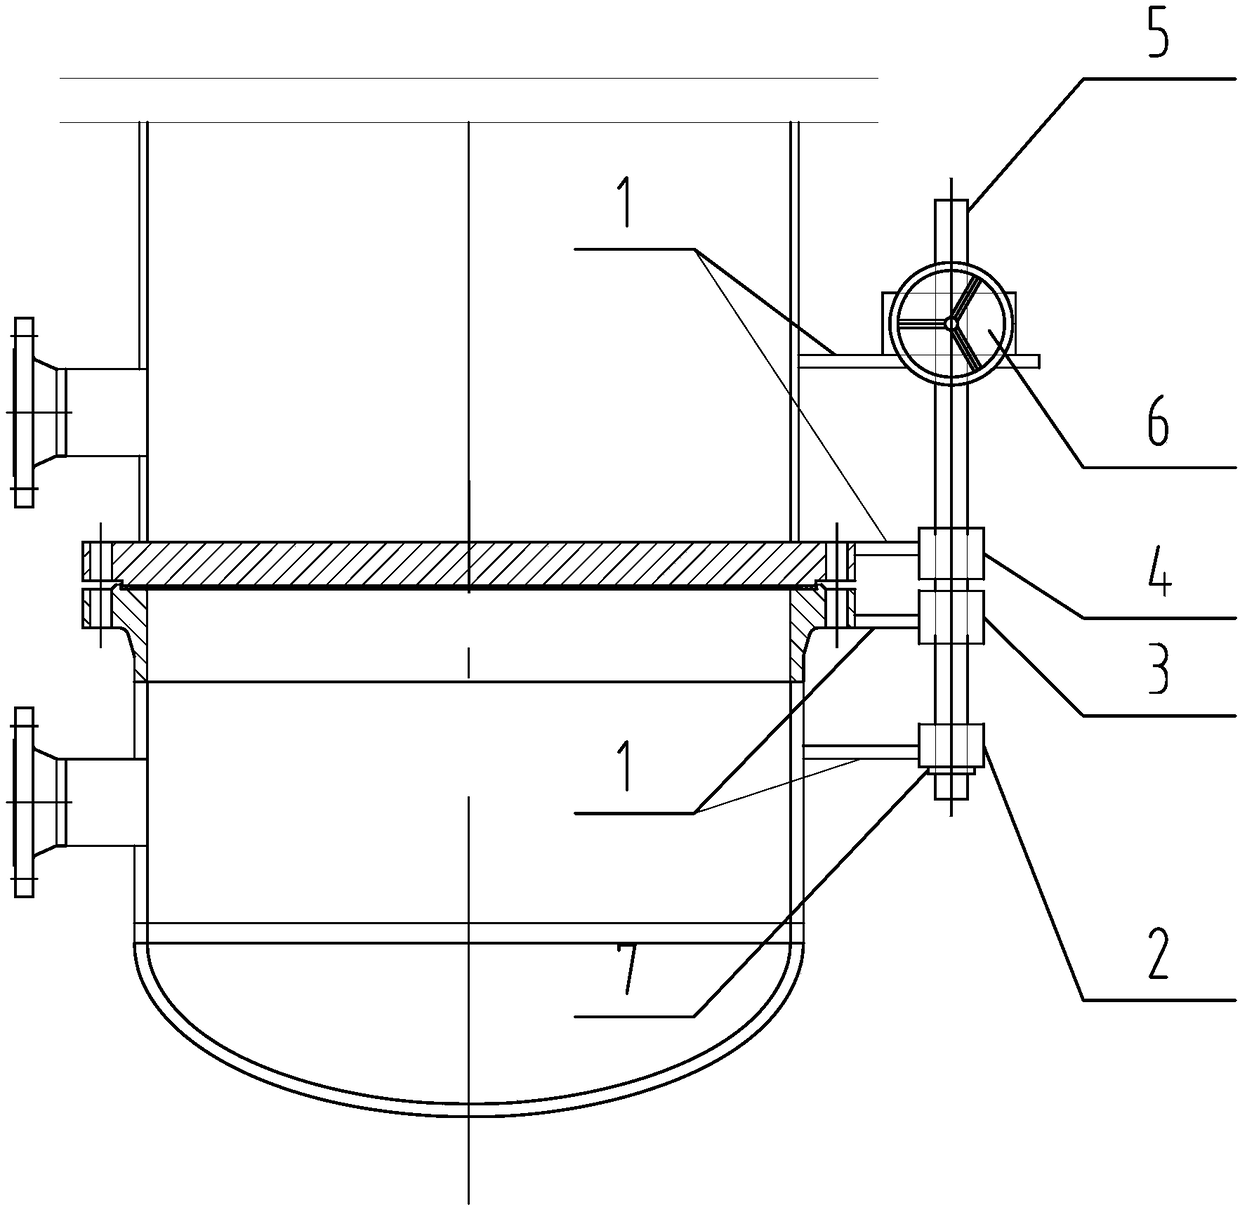 Simple assembling and disassembling device for vertical straight arm flange connecting equipment